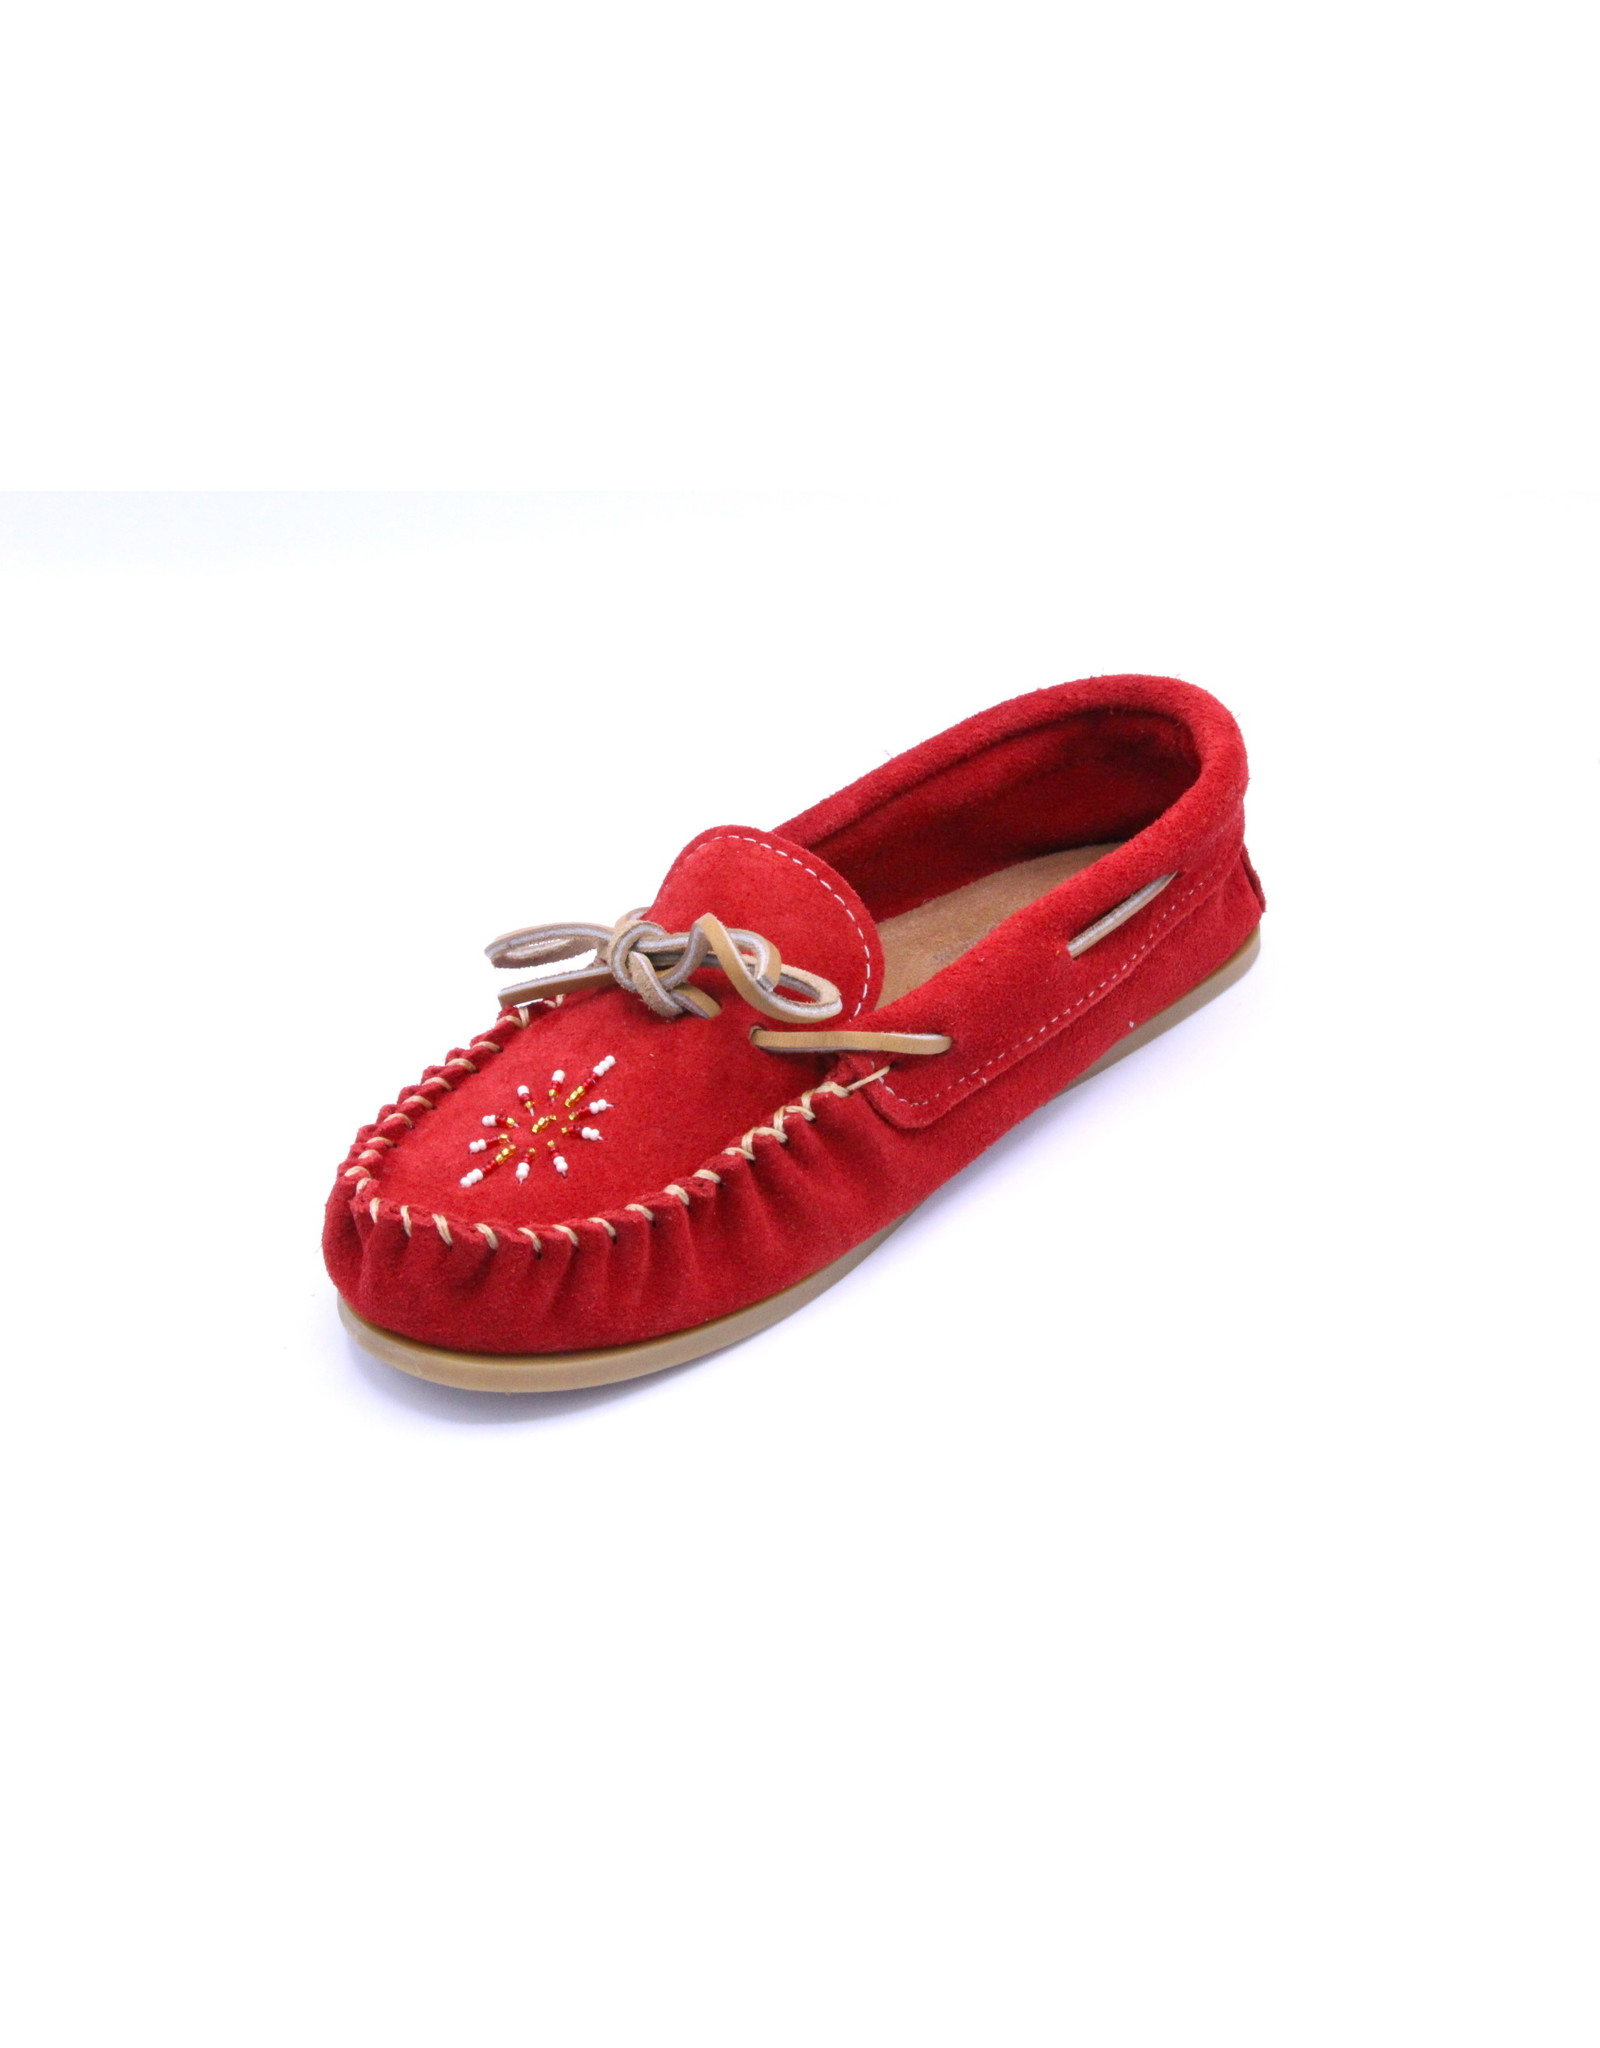 Ladies Red Apple Moccasin with Sole